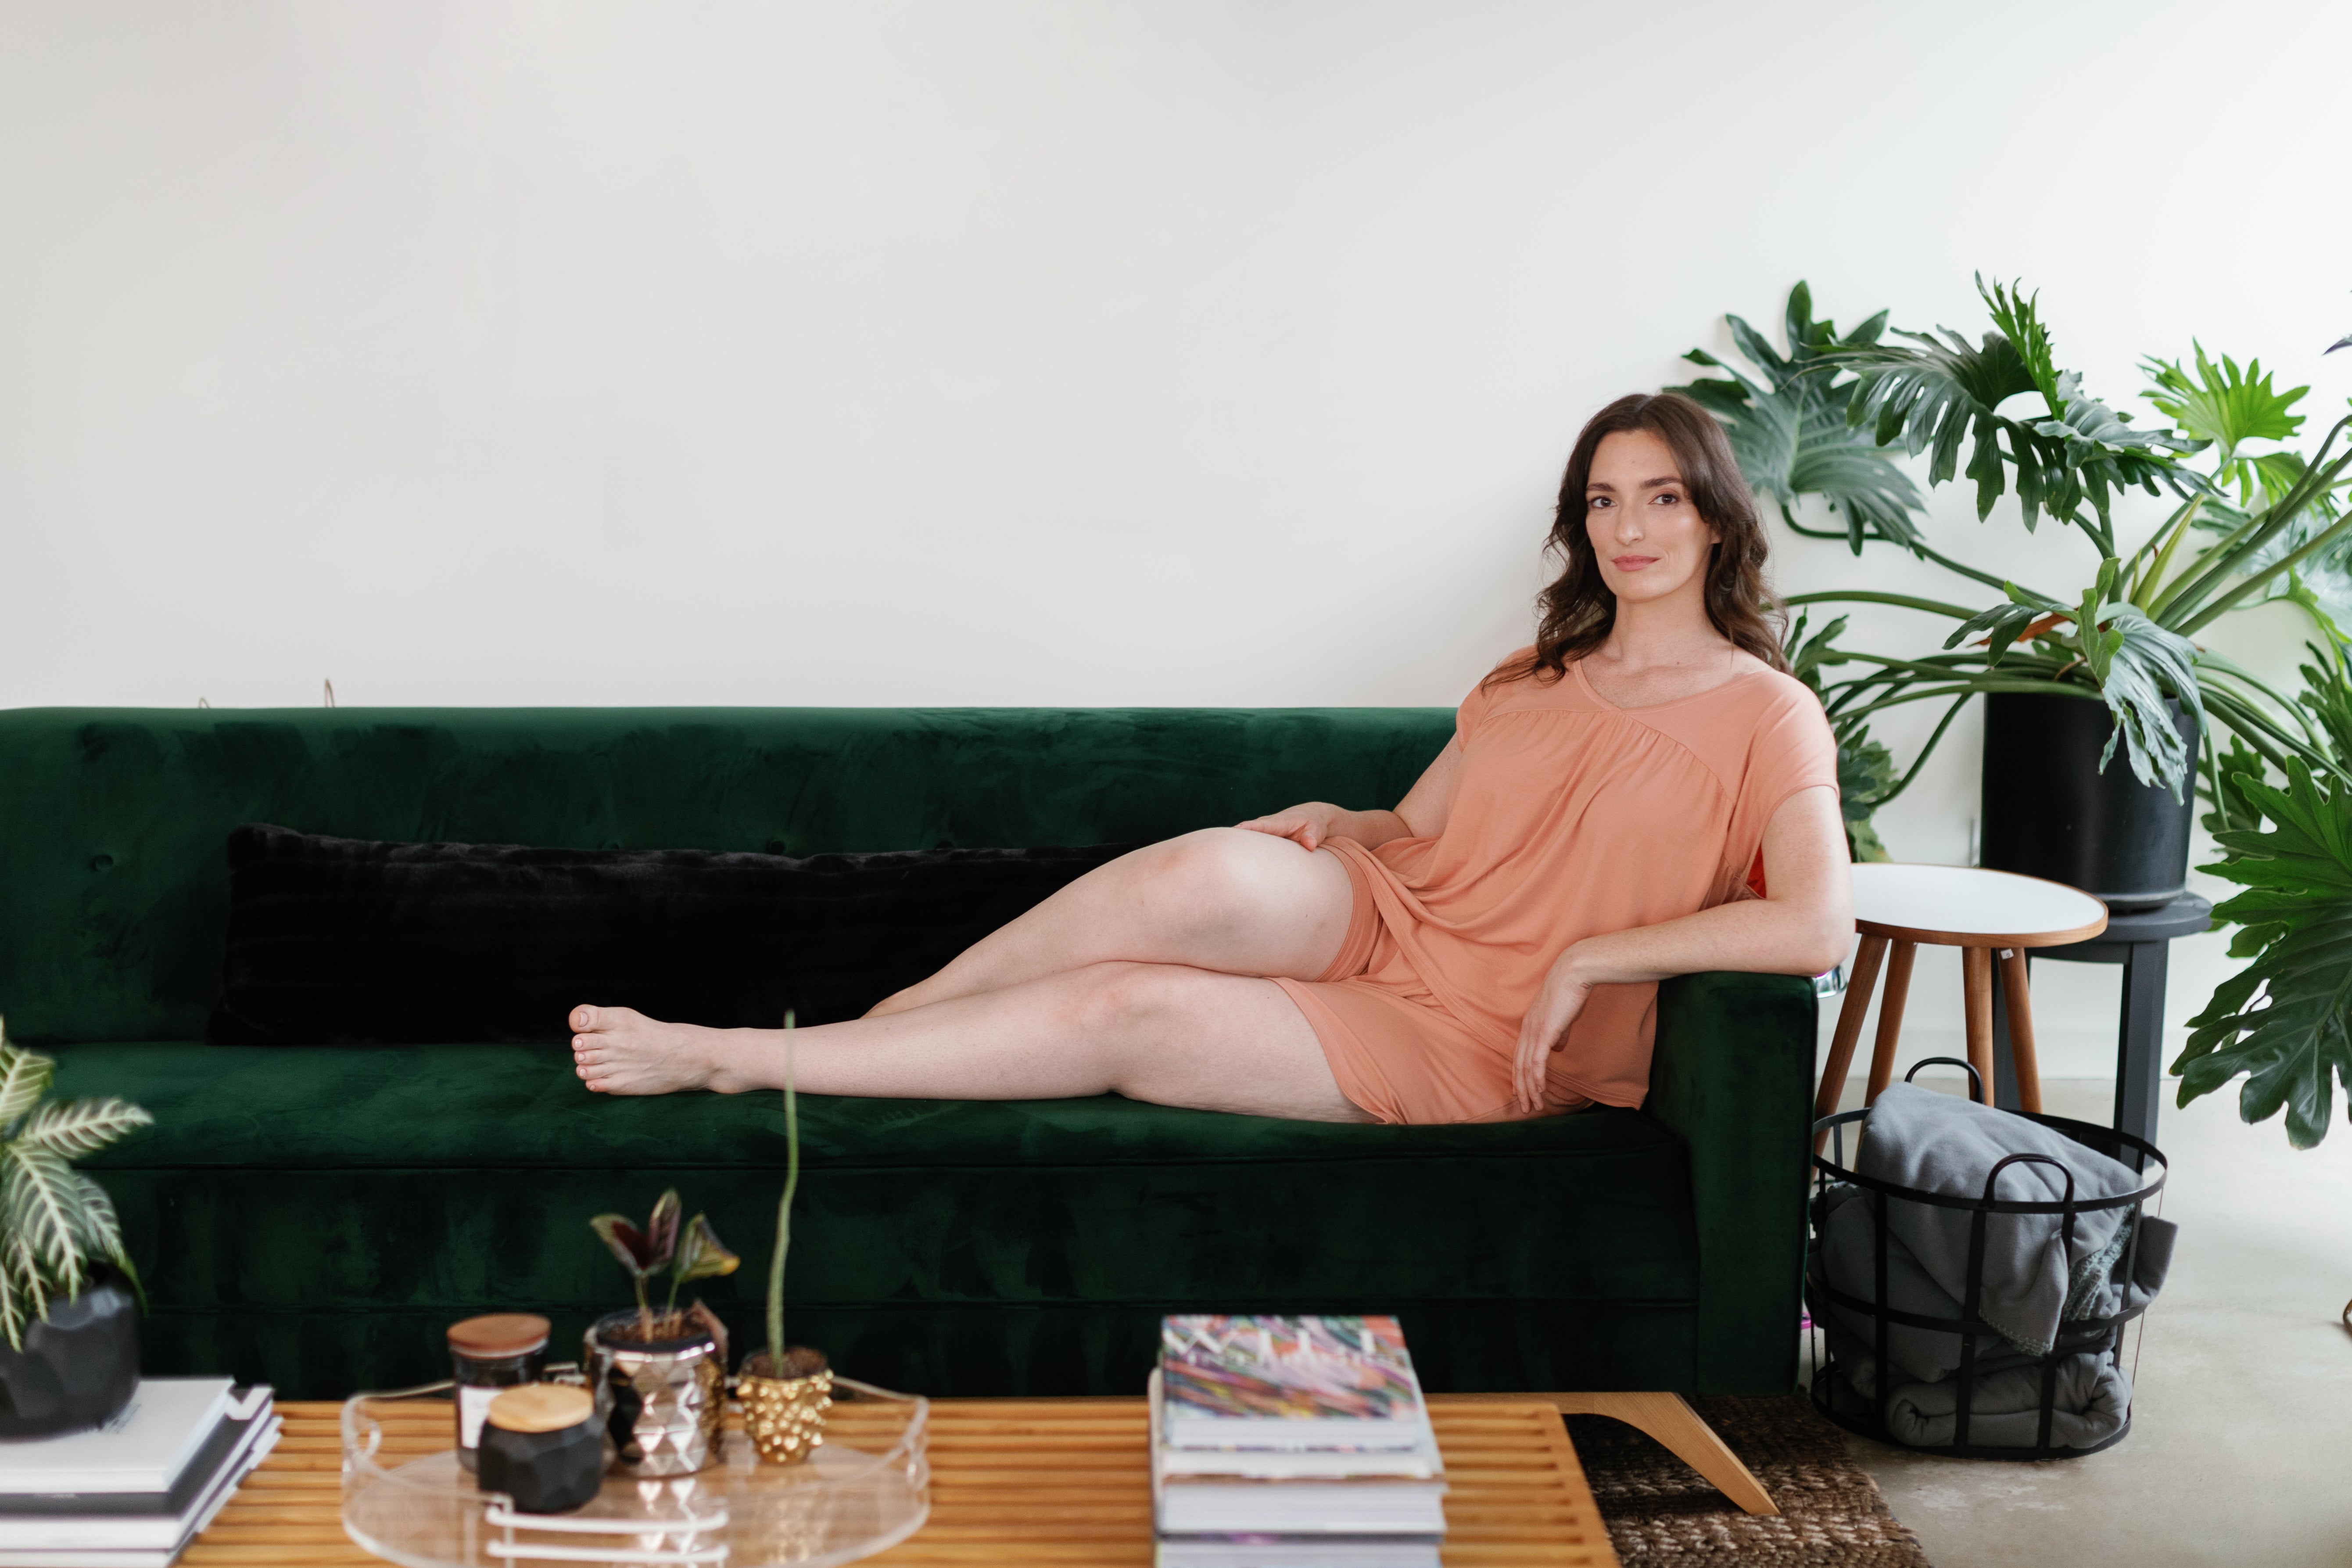 Women lounging on a green couch in an apricot colored Naomi PJ Set.